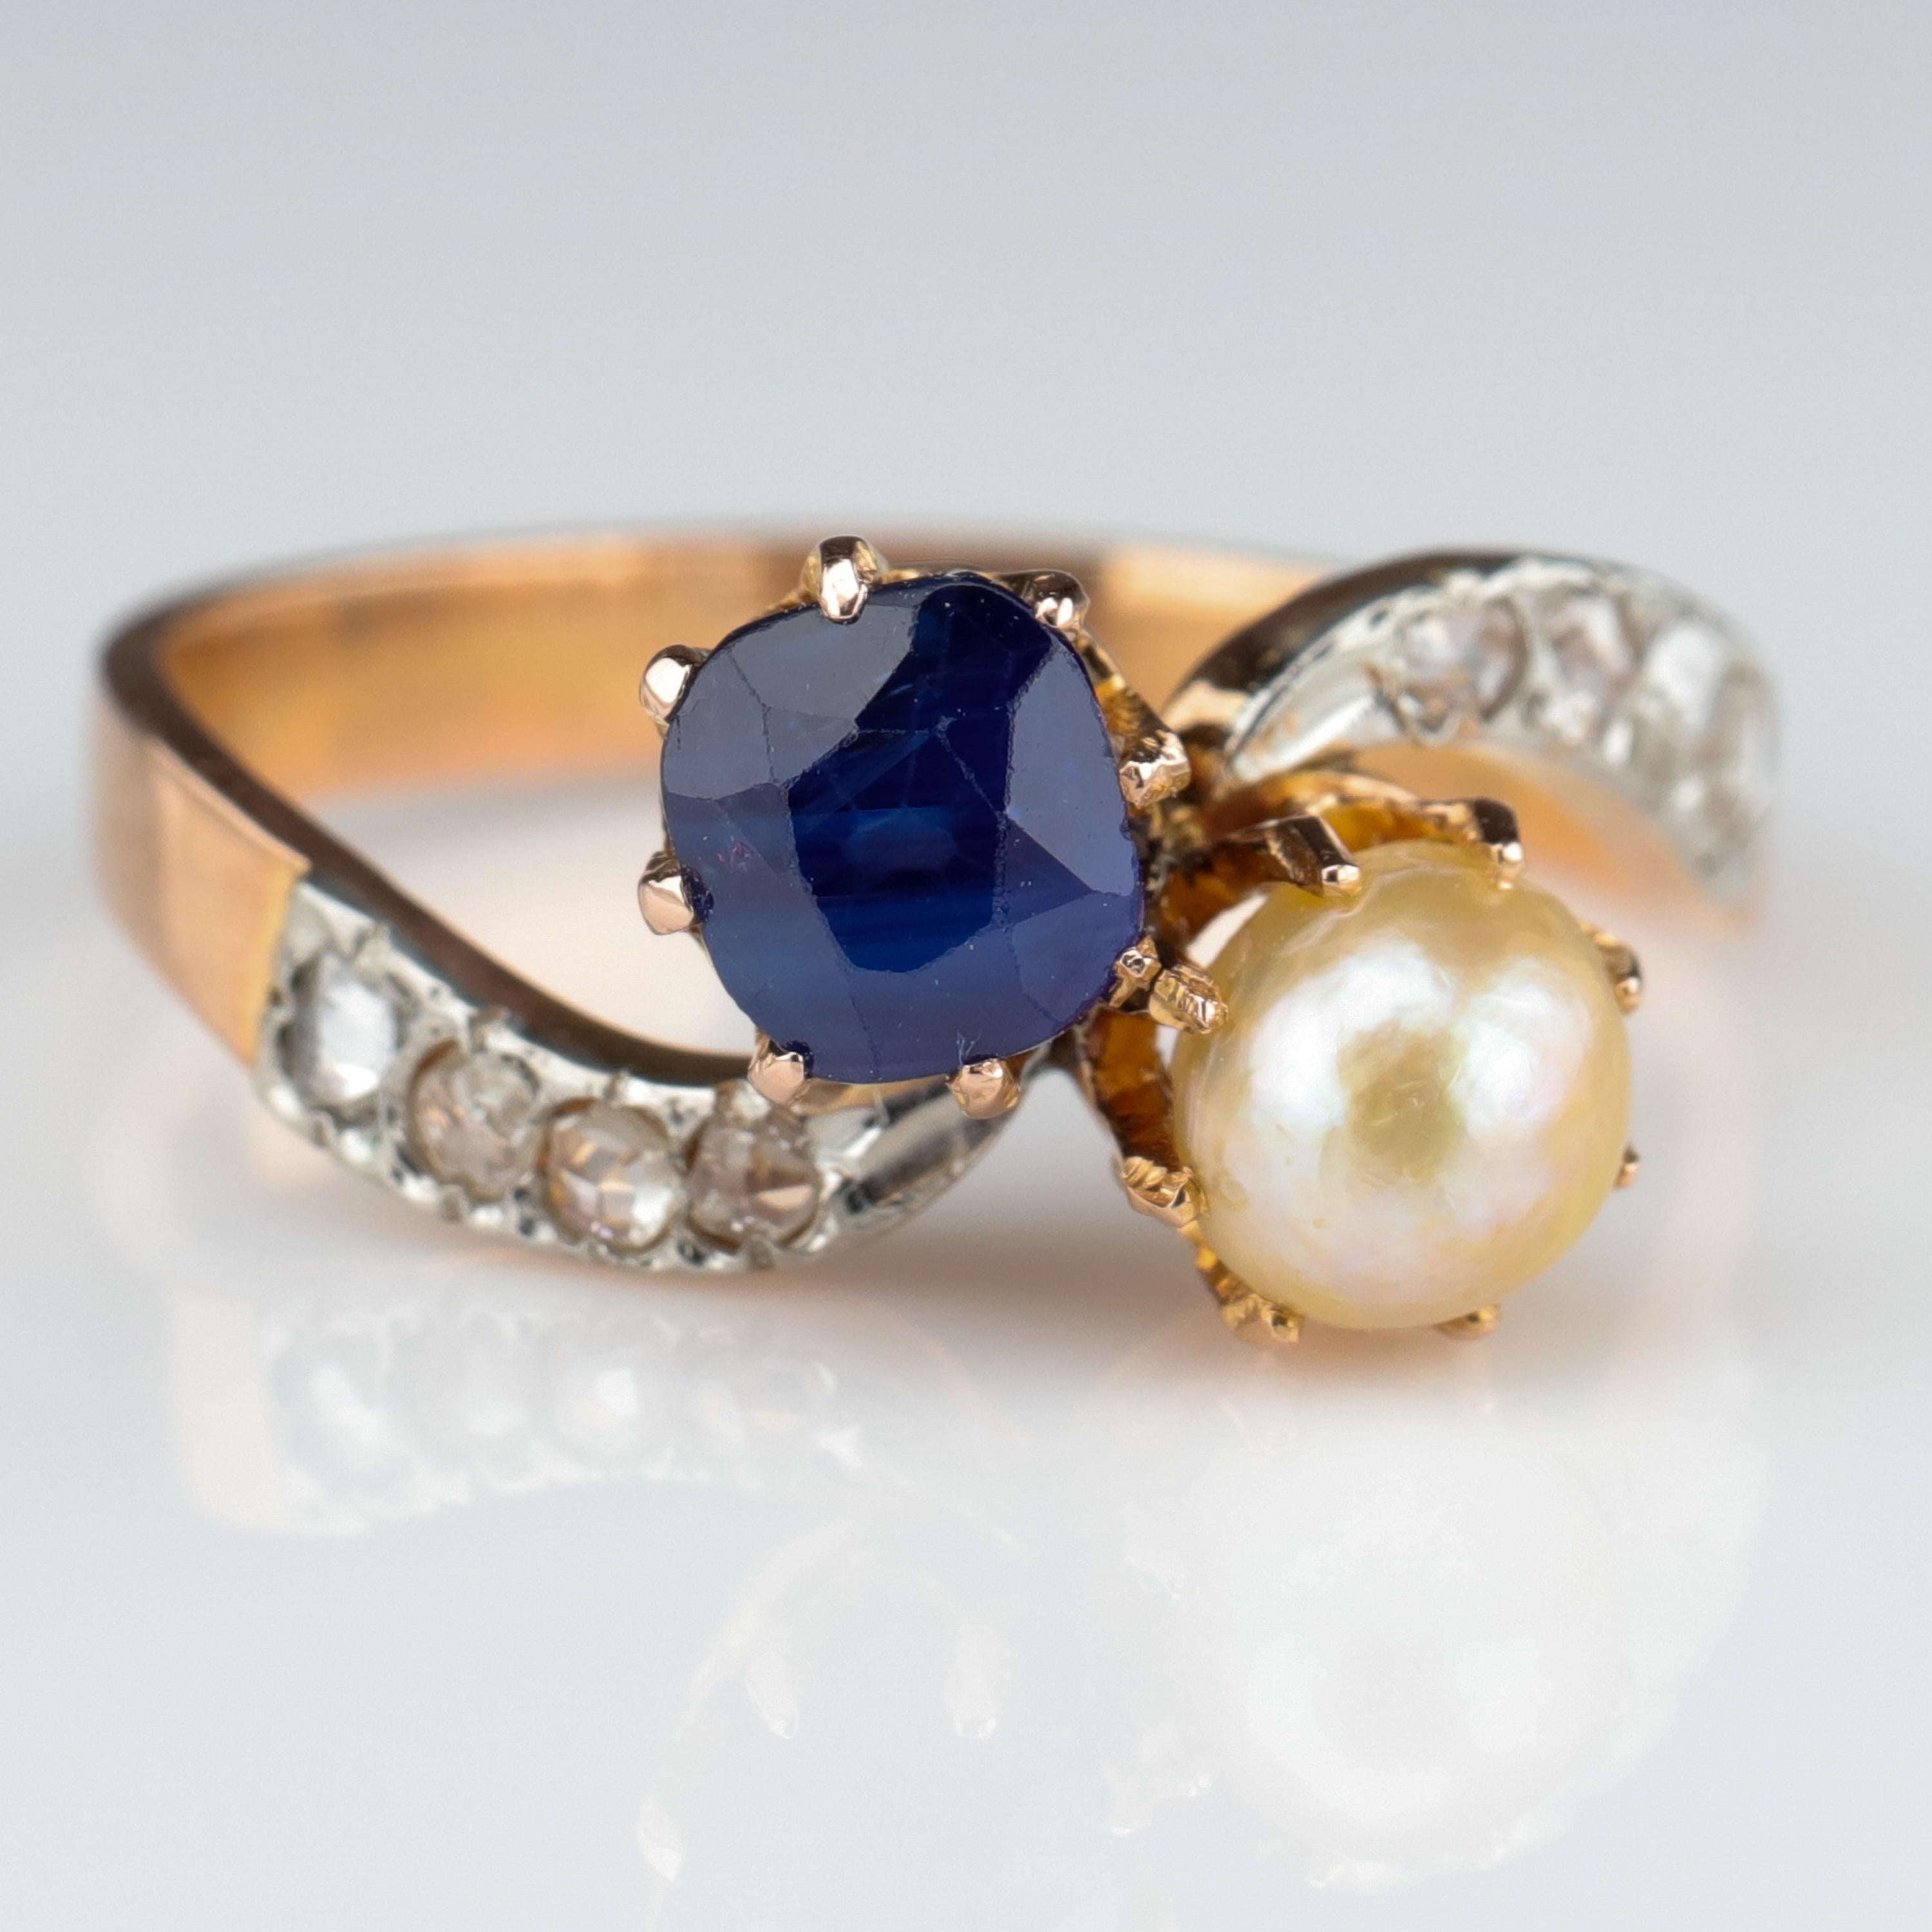 This magnificent French Art Nouveau crossover toi et moi (you and me) ring was handcrafted near the turn of the previous century from 18K rose gold and platinum. Elegantly formed prongs hold one natural 5.12 mm 3/4 pearl and one .70 carat triumphant